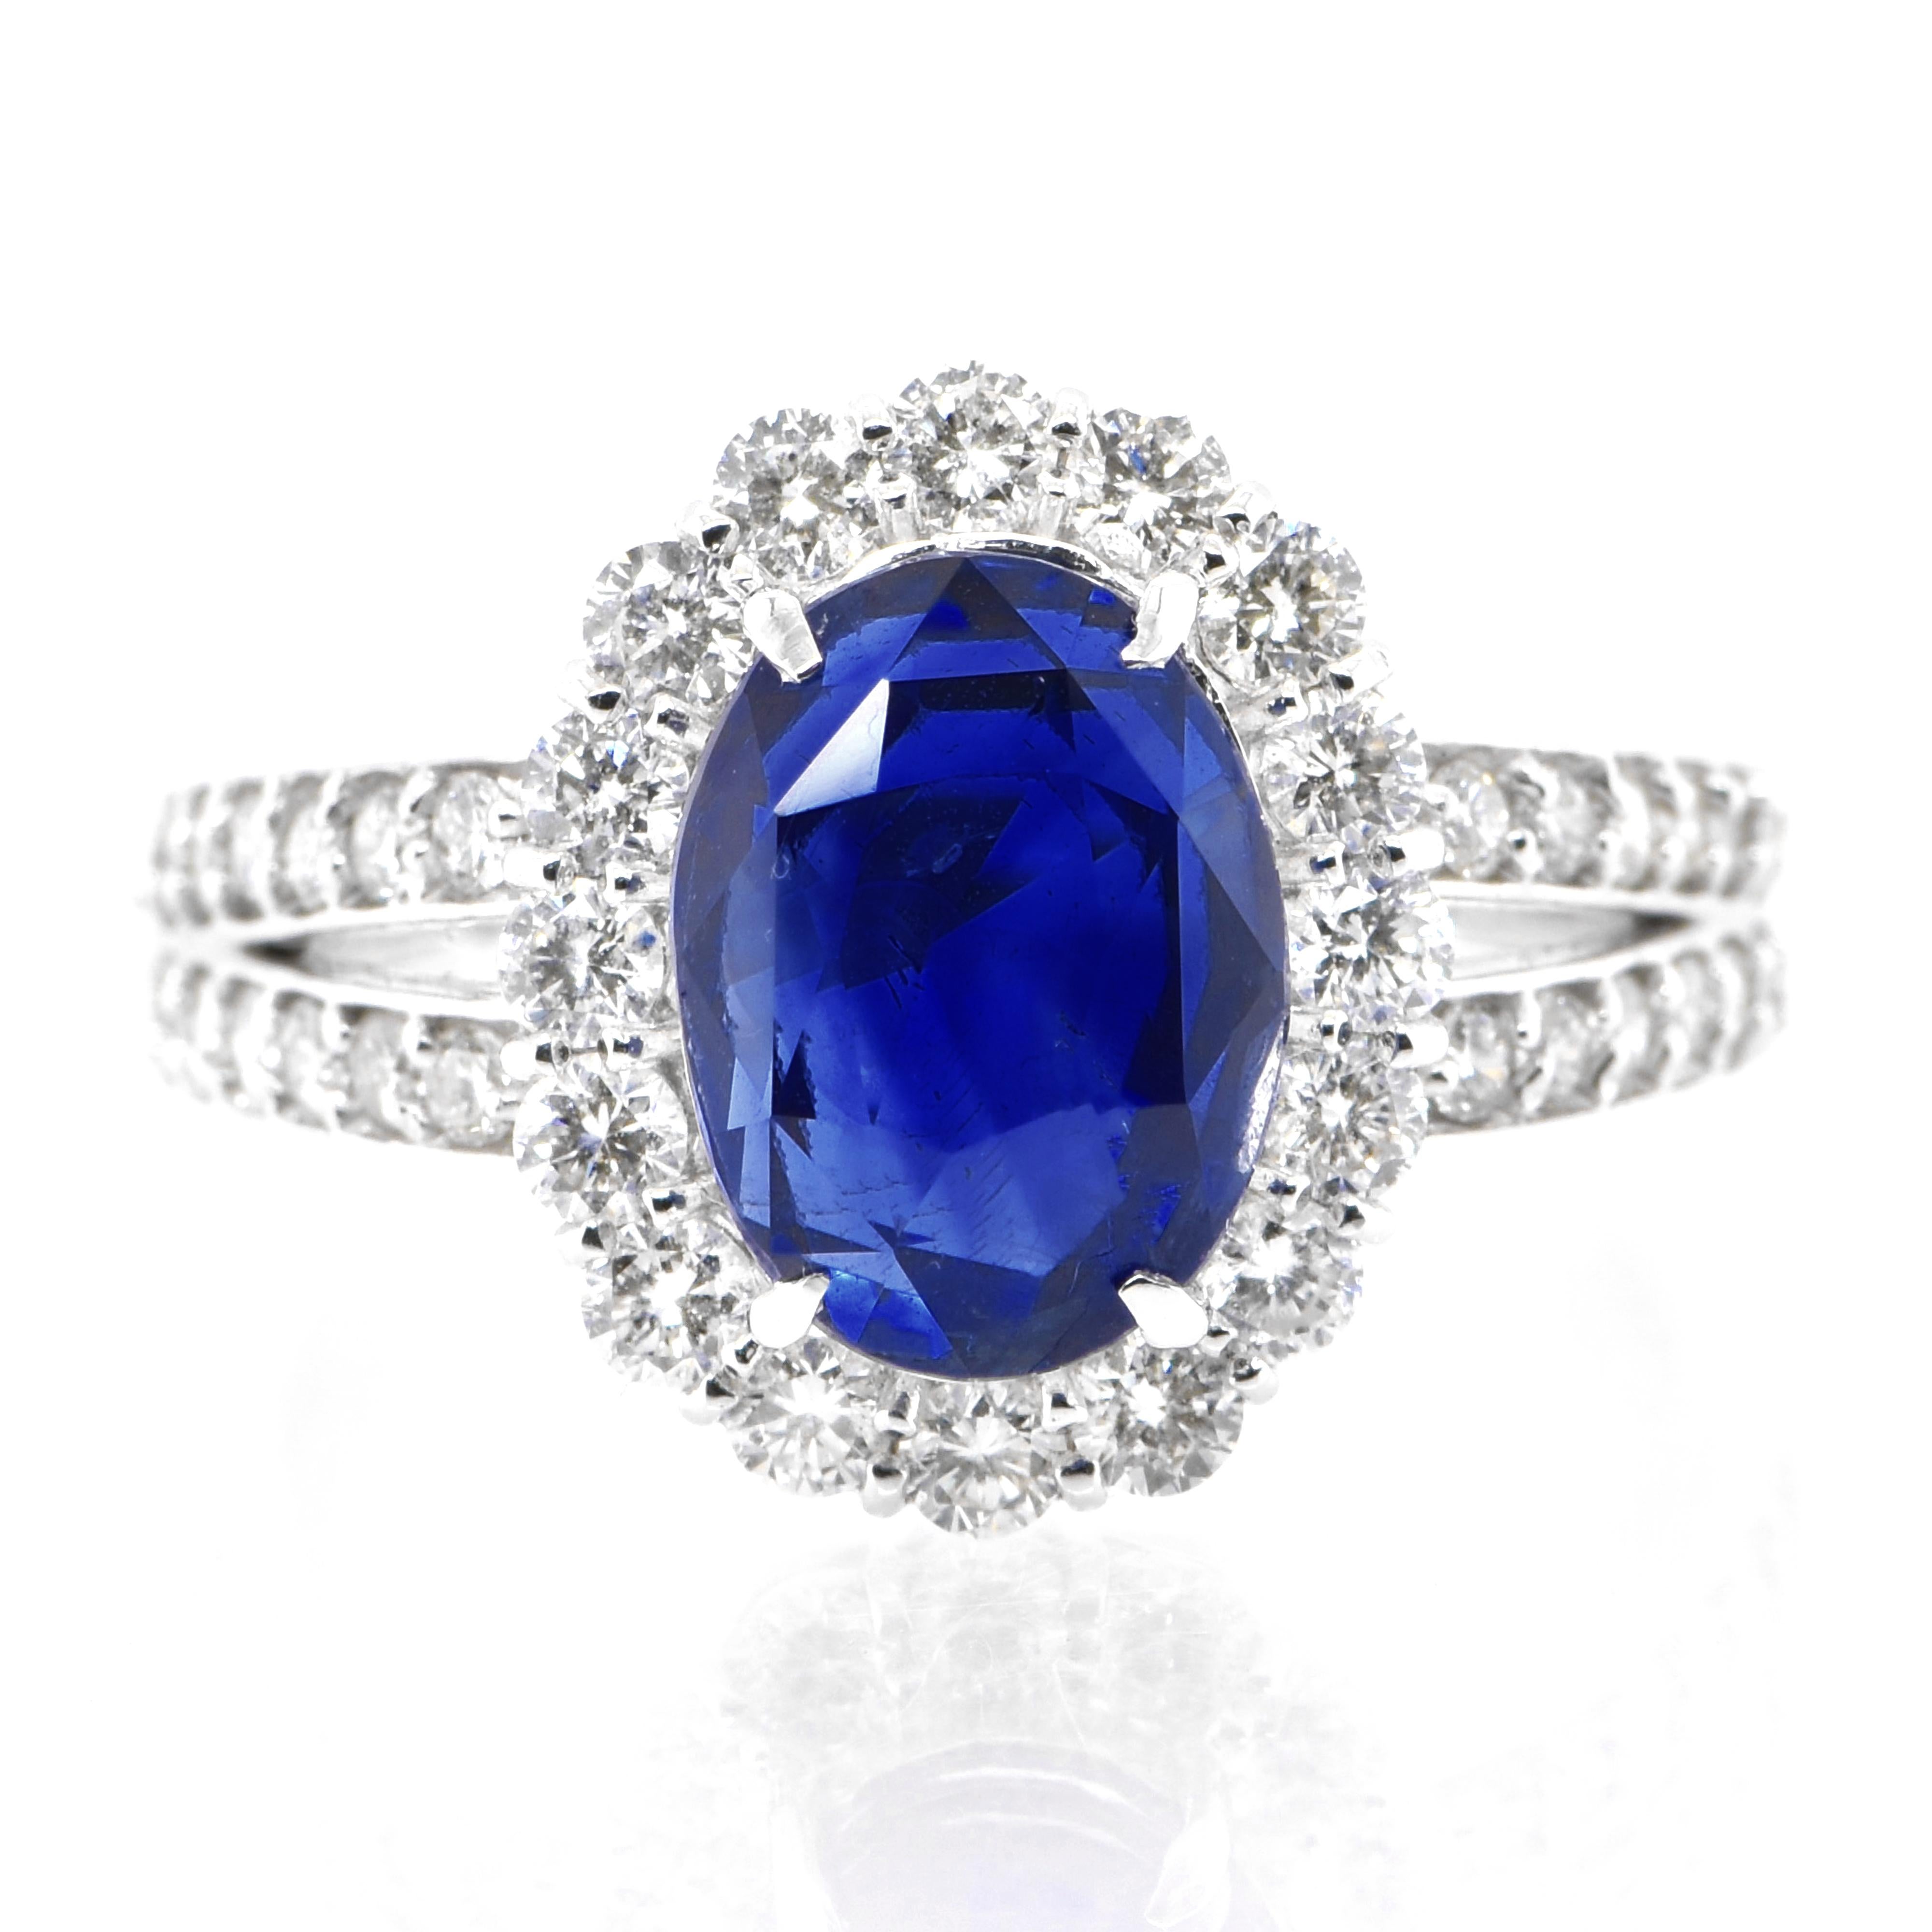 A beautiful ring featuring a 3.85 Carat Natural Sapphire and 0.78 Carats Diamond Accents set in Platinum. Sapphires have extraordinary durability - they excel in hardness as well as toughness and durability making them very popular in jewelry.